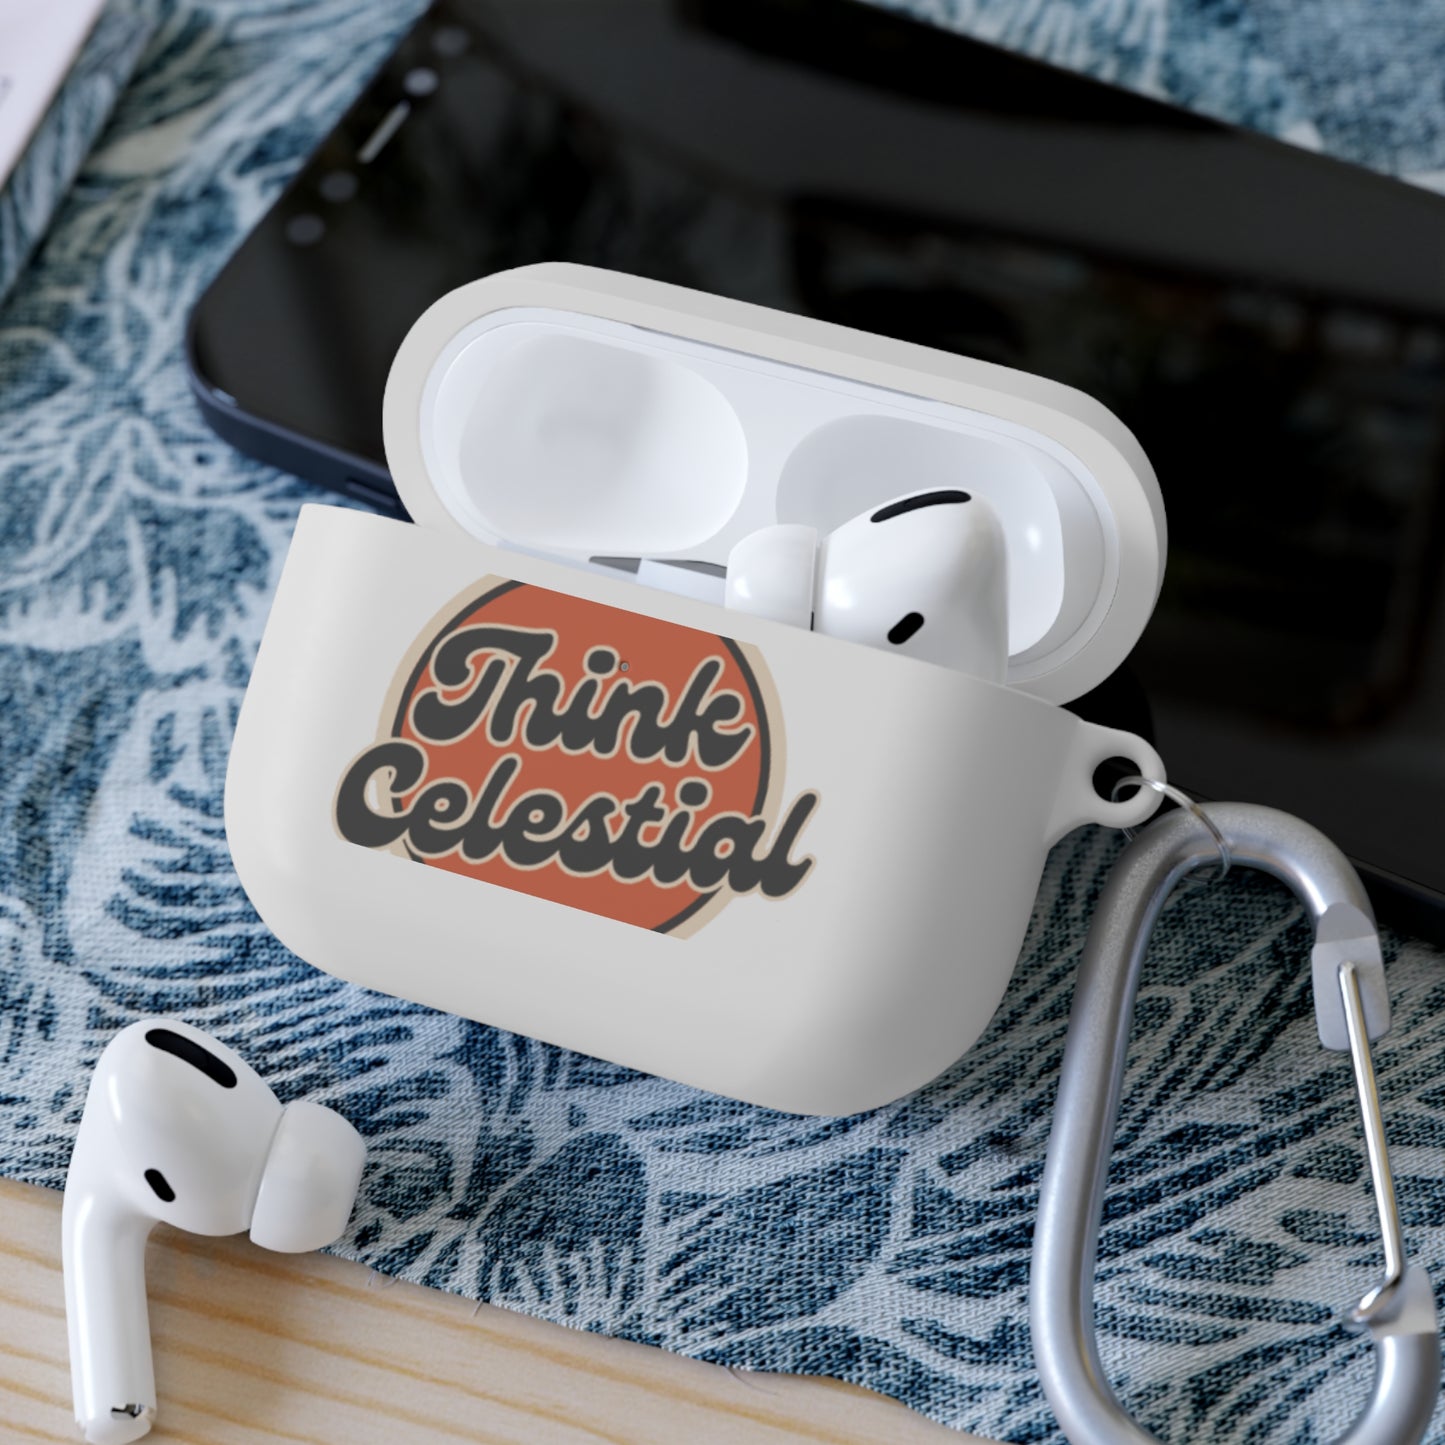 AirPods and AirPods Pro Retro Think Celestial Case Cover